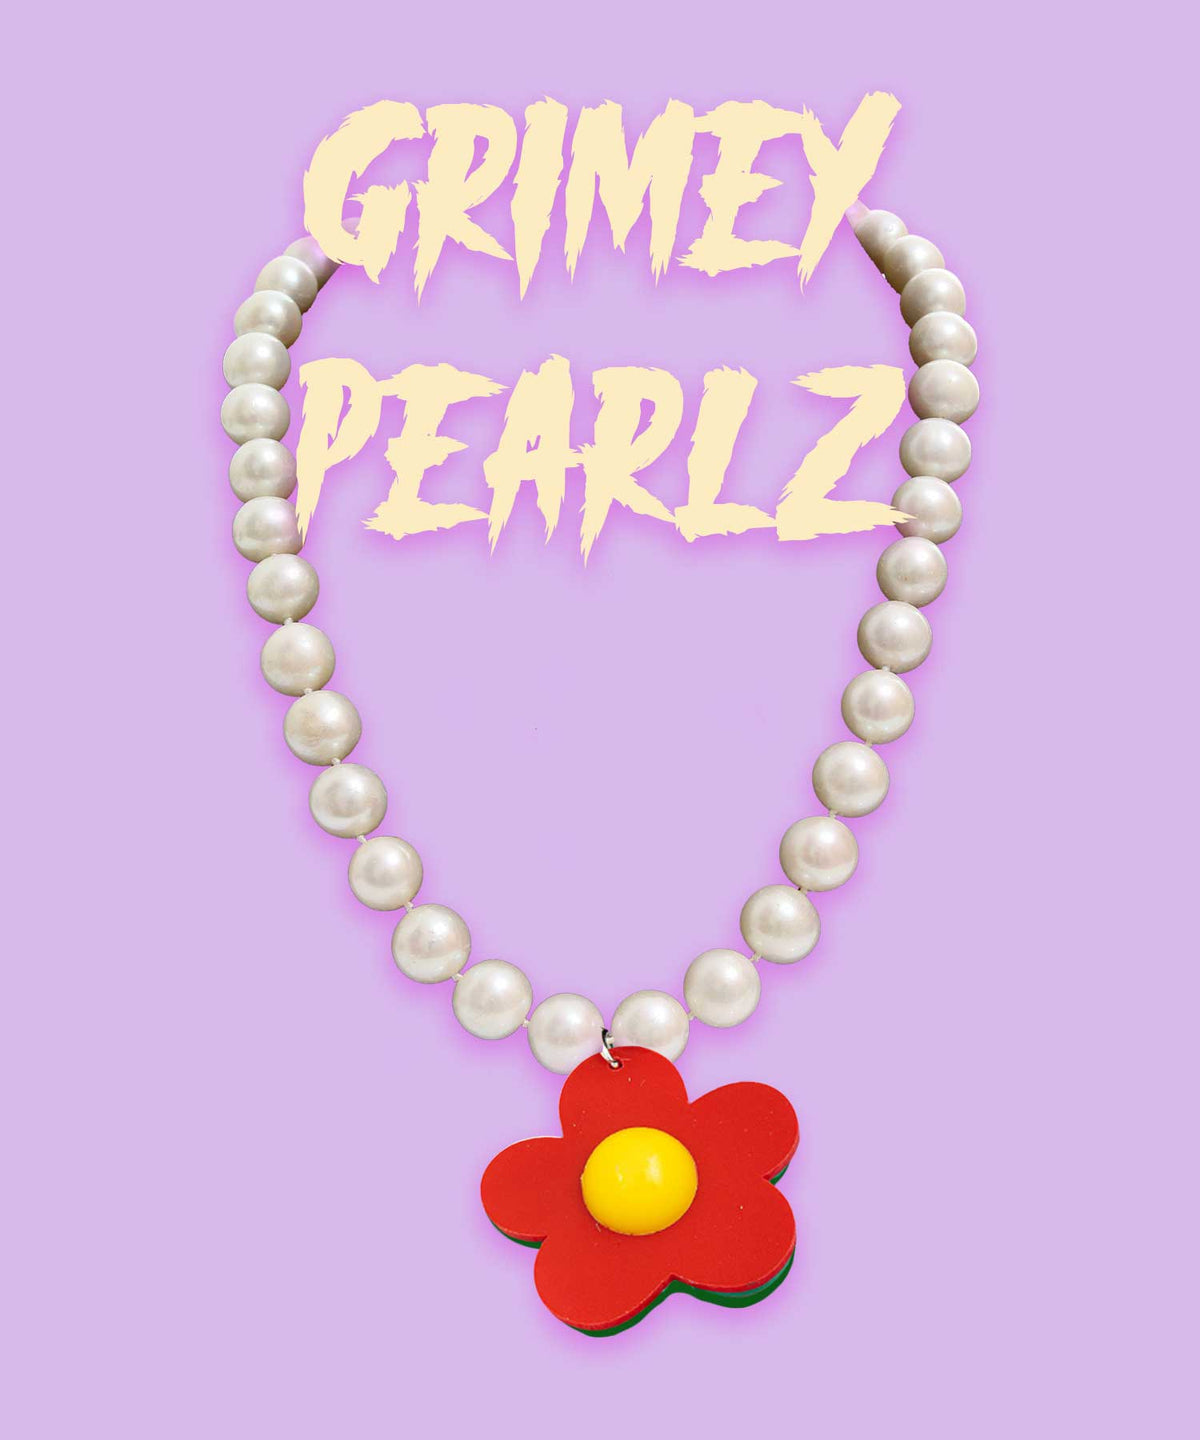 Red Grimey Pearlz